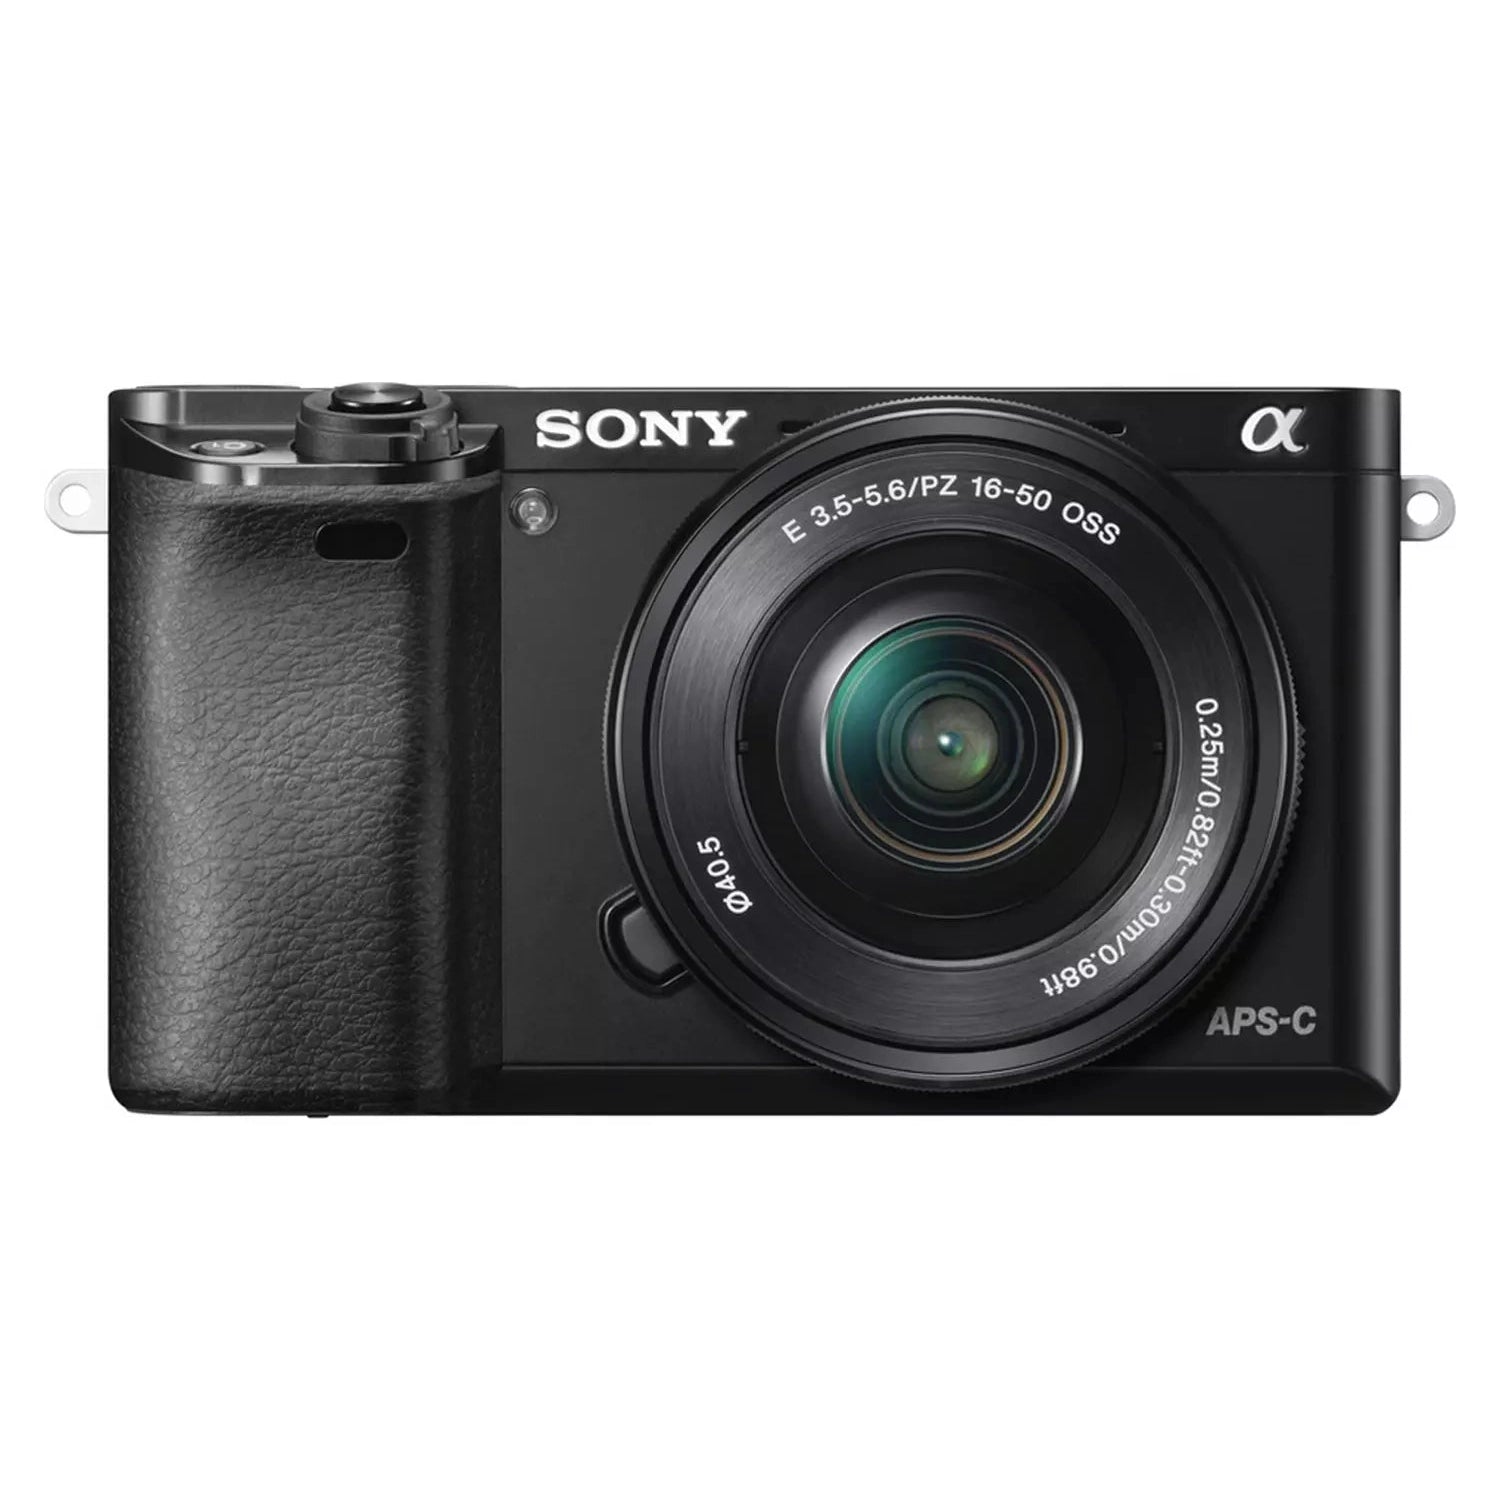 Sony A6000 Mirrorless Camera With 16-50mm Lens, Black - Refurbished Good